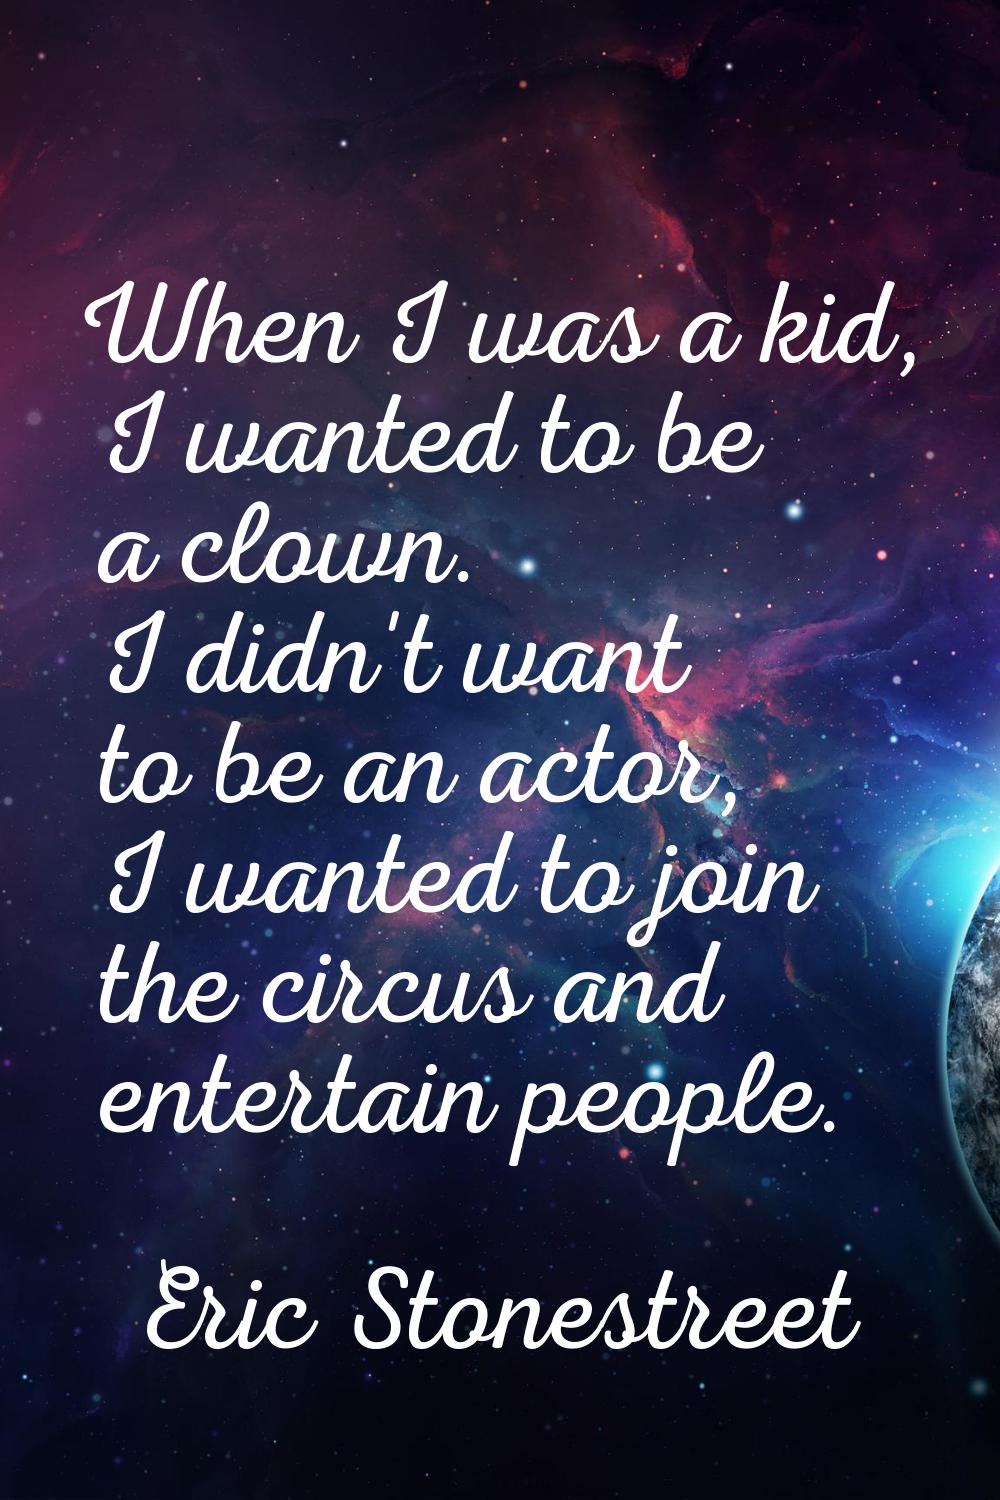 When I was a kid, I wanted to be a clown. I didn't want to be an actor, I wanted to join the circus